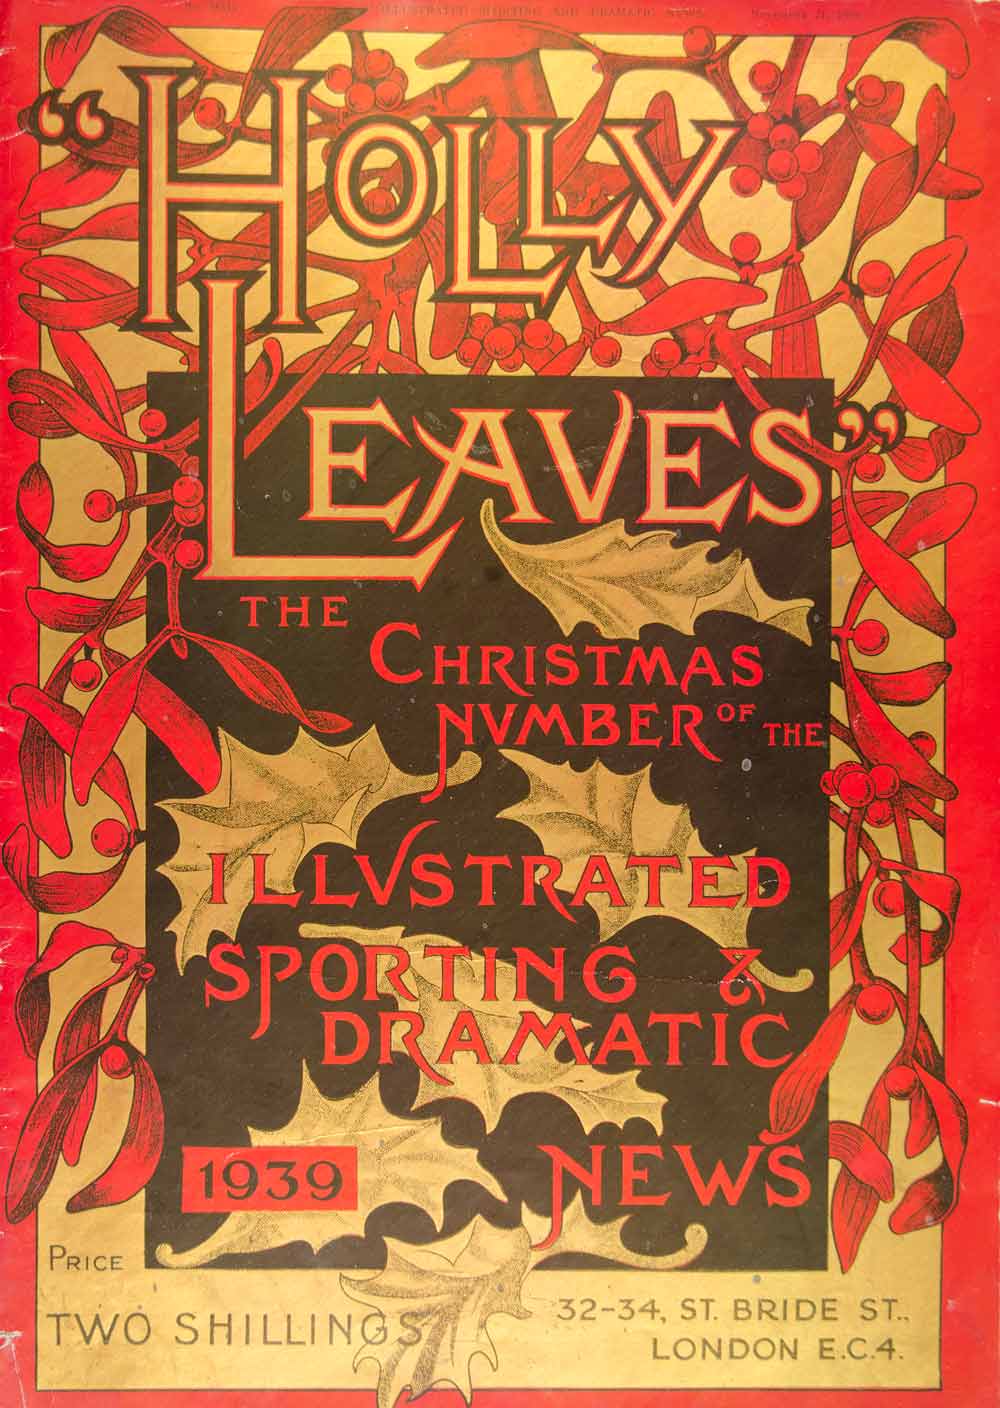 1939 Lithograph Cover Holly Leaves Illustrated Sporting Dramatic News YHL1